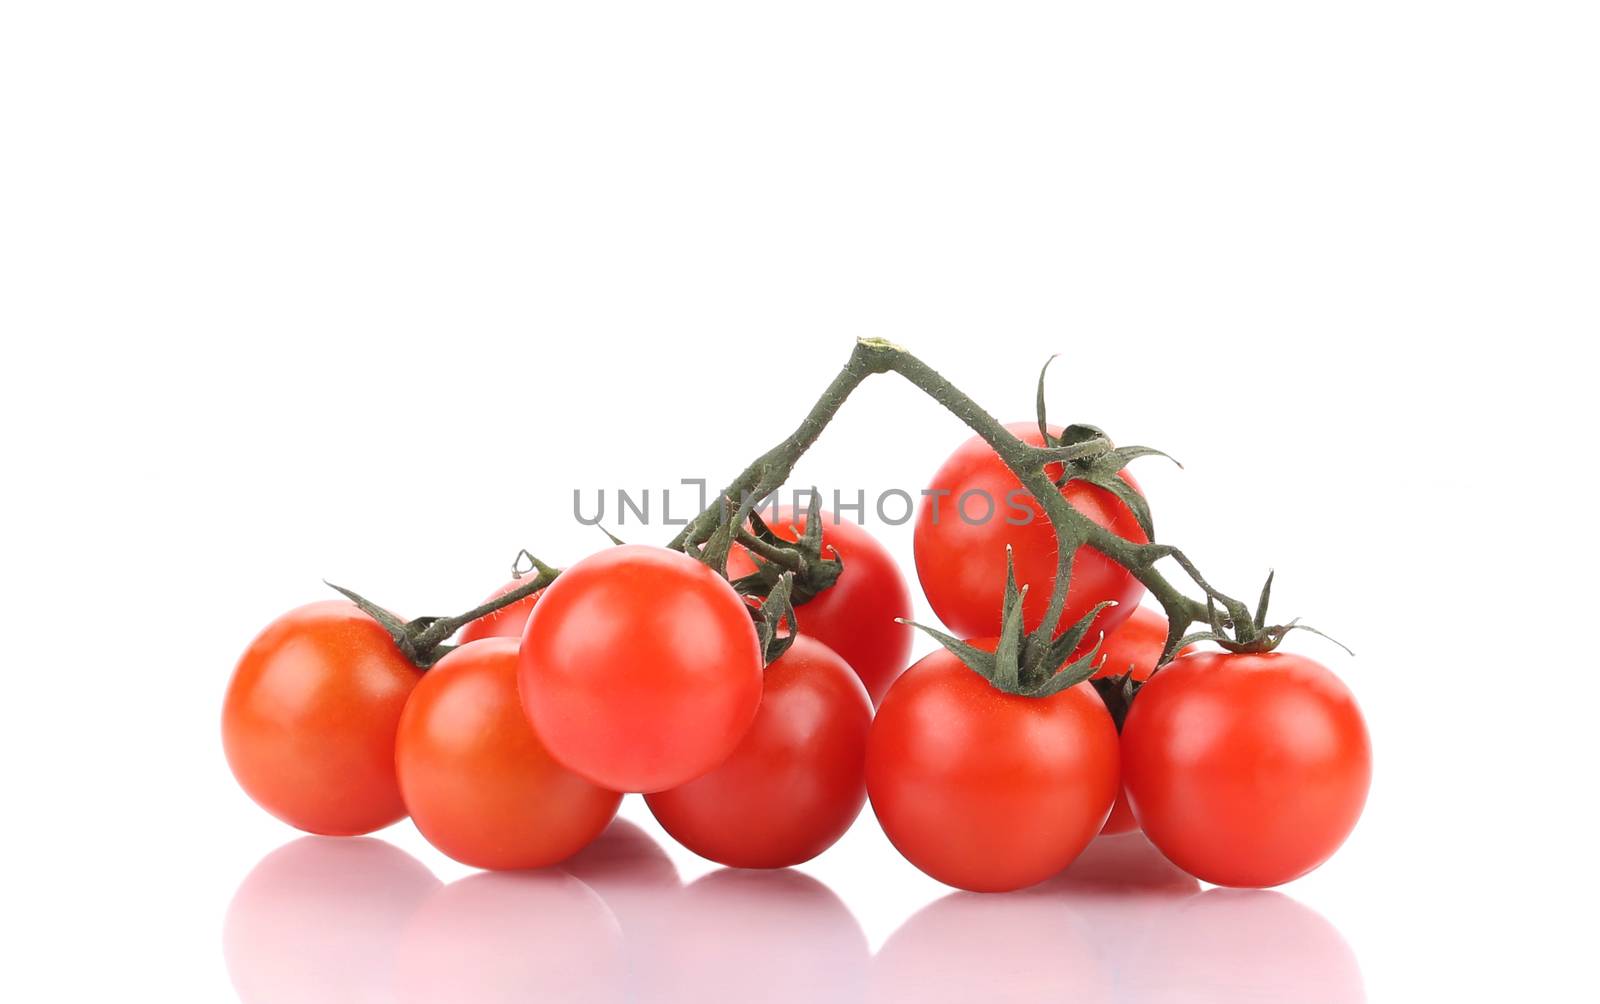 Tasty ripe tomatoes-cherry. Isolated on a white background.